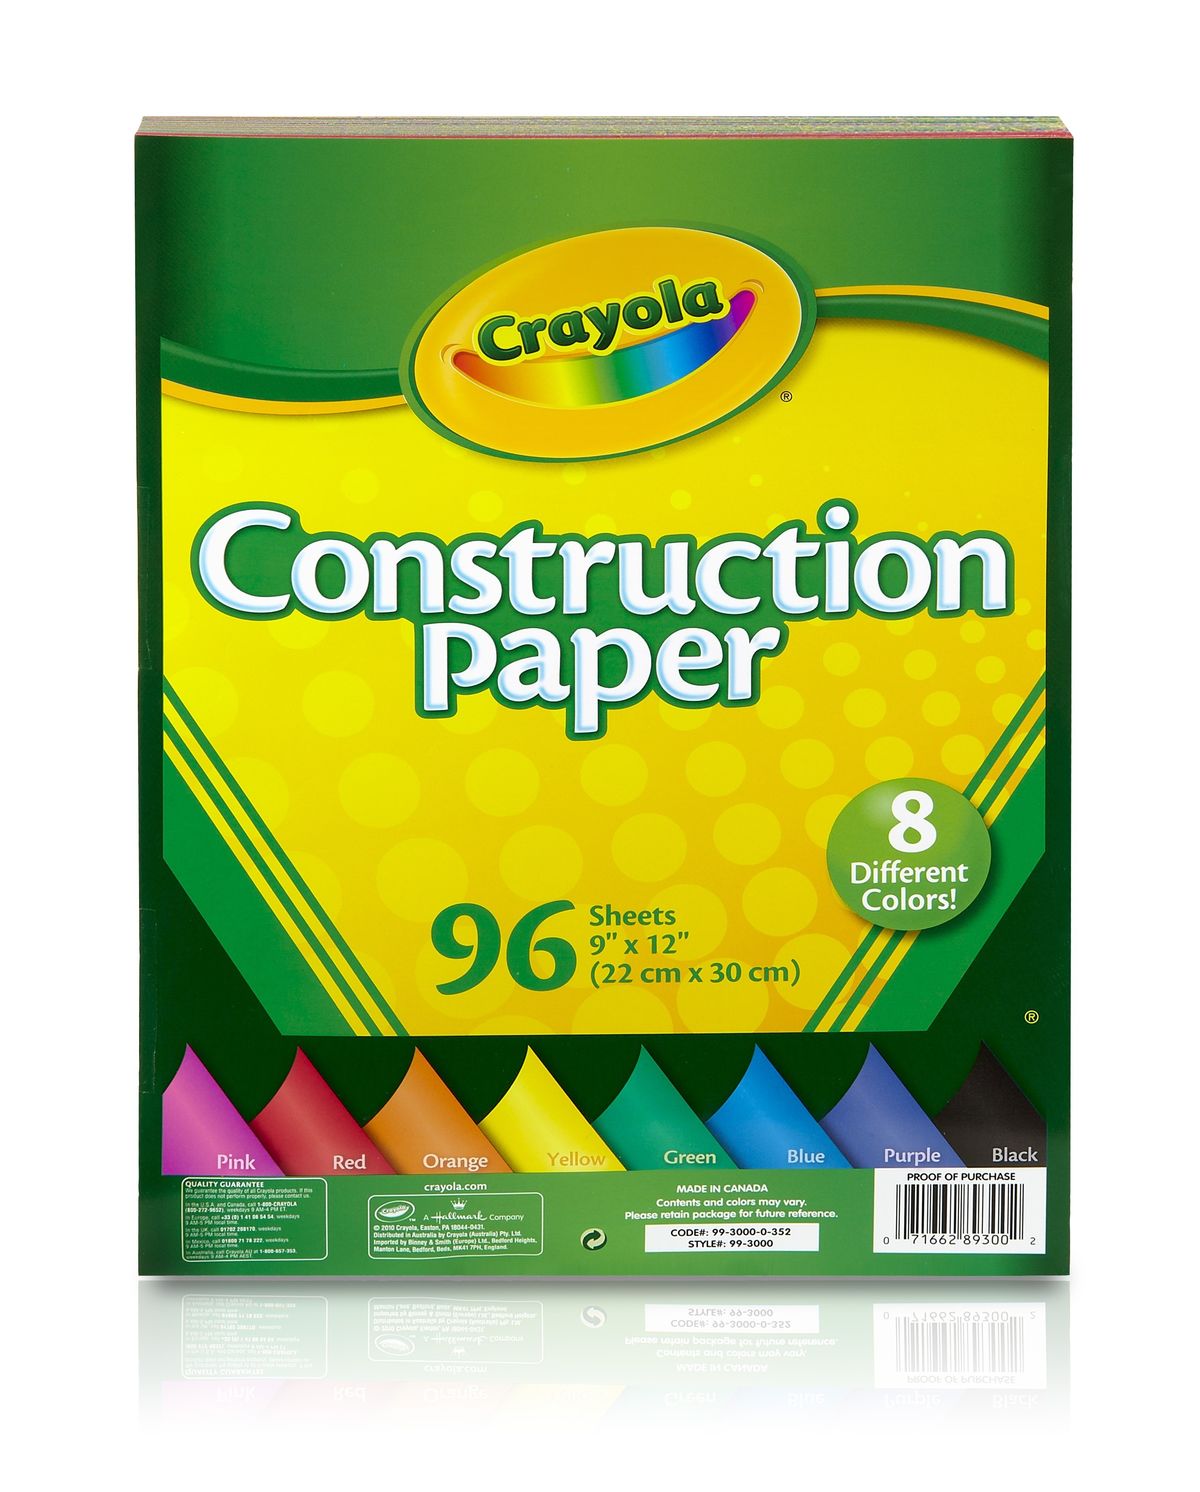 Crayola Construction Paper – Assorted Colors 96 Sheets